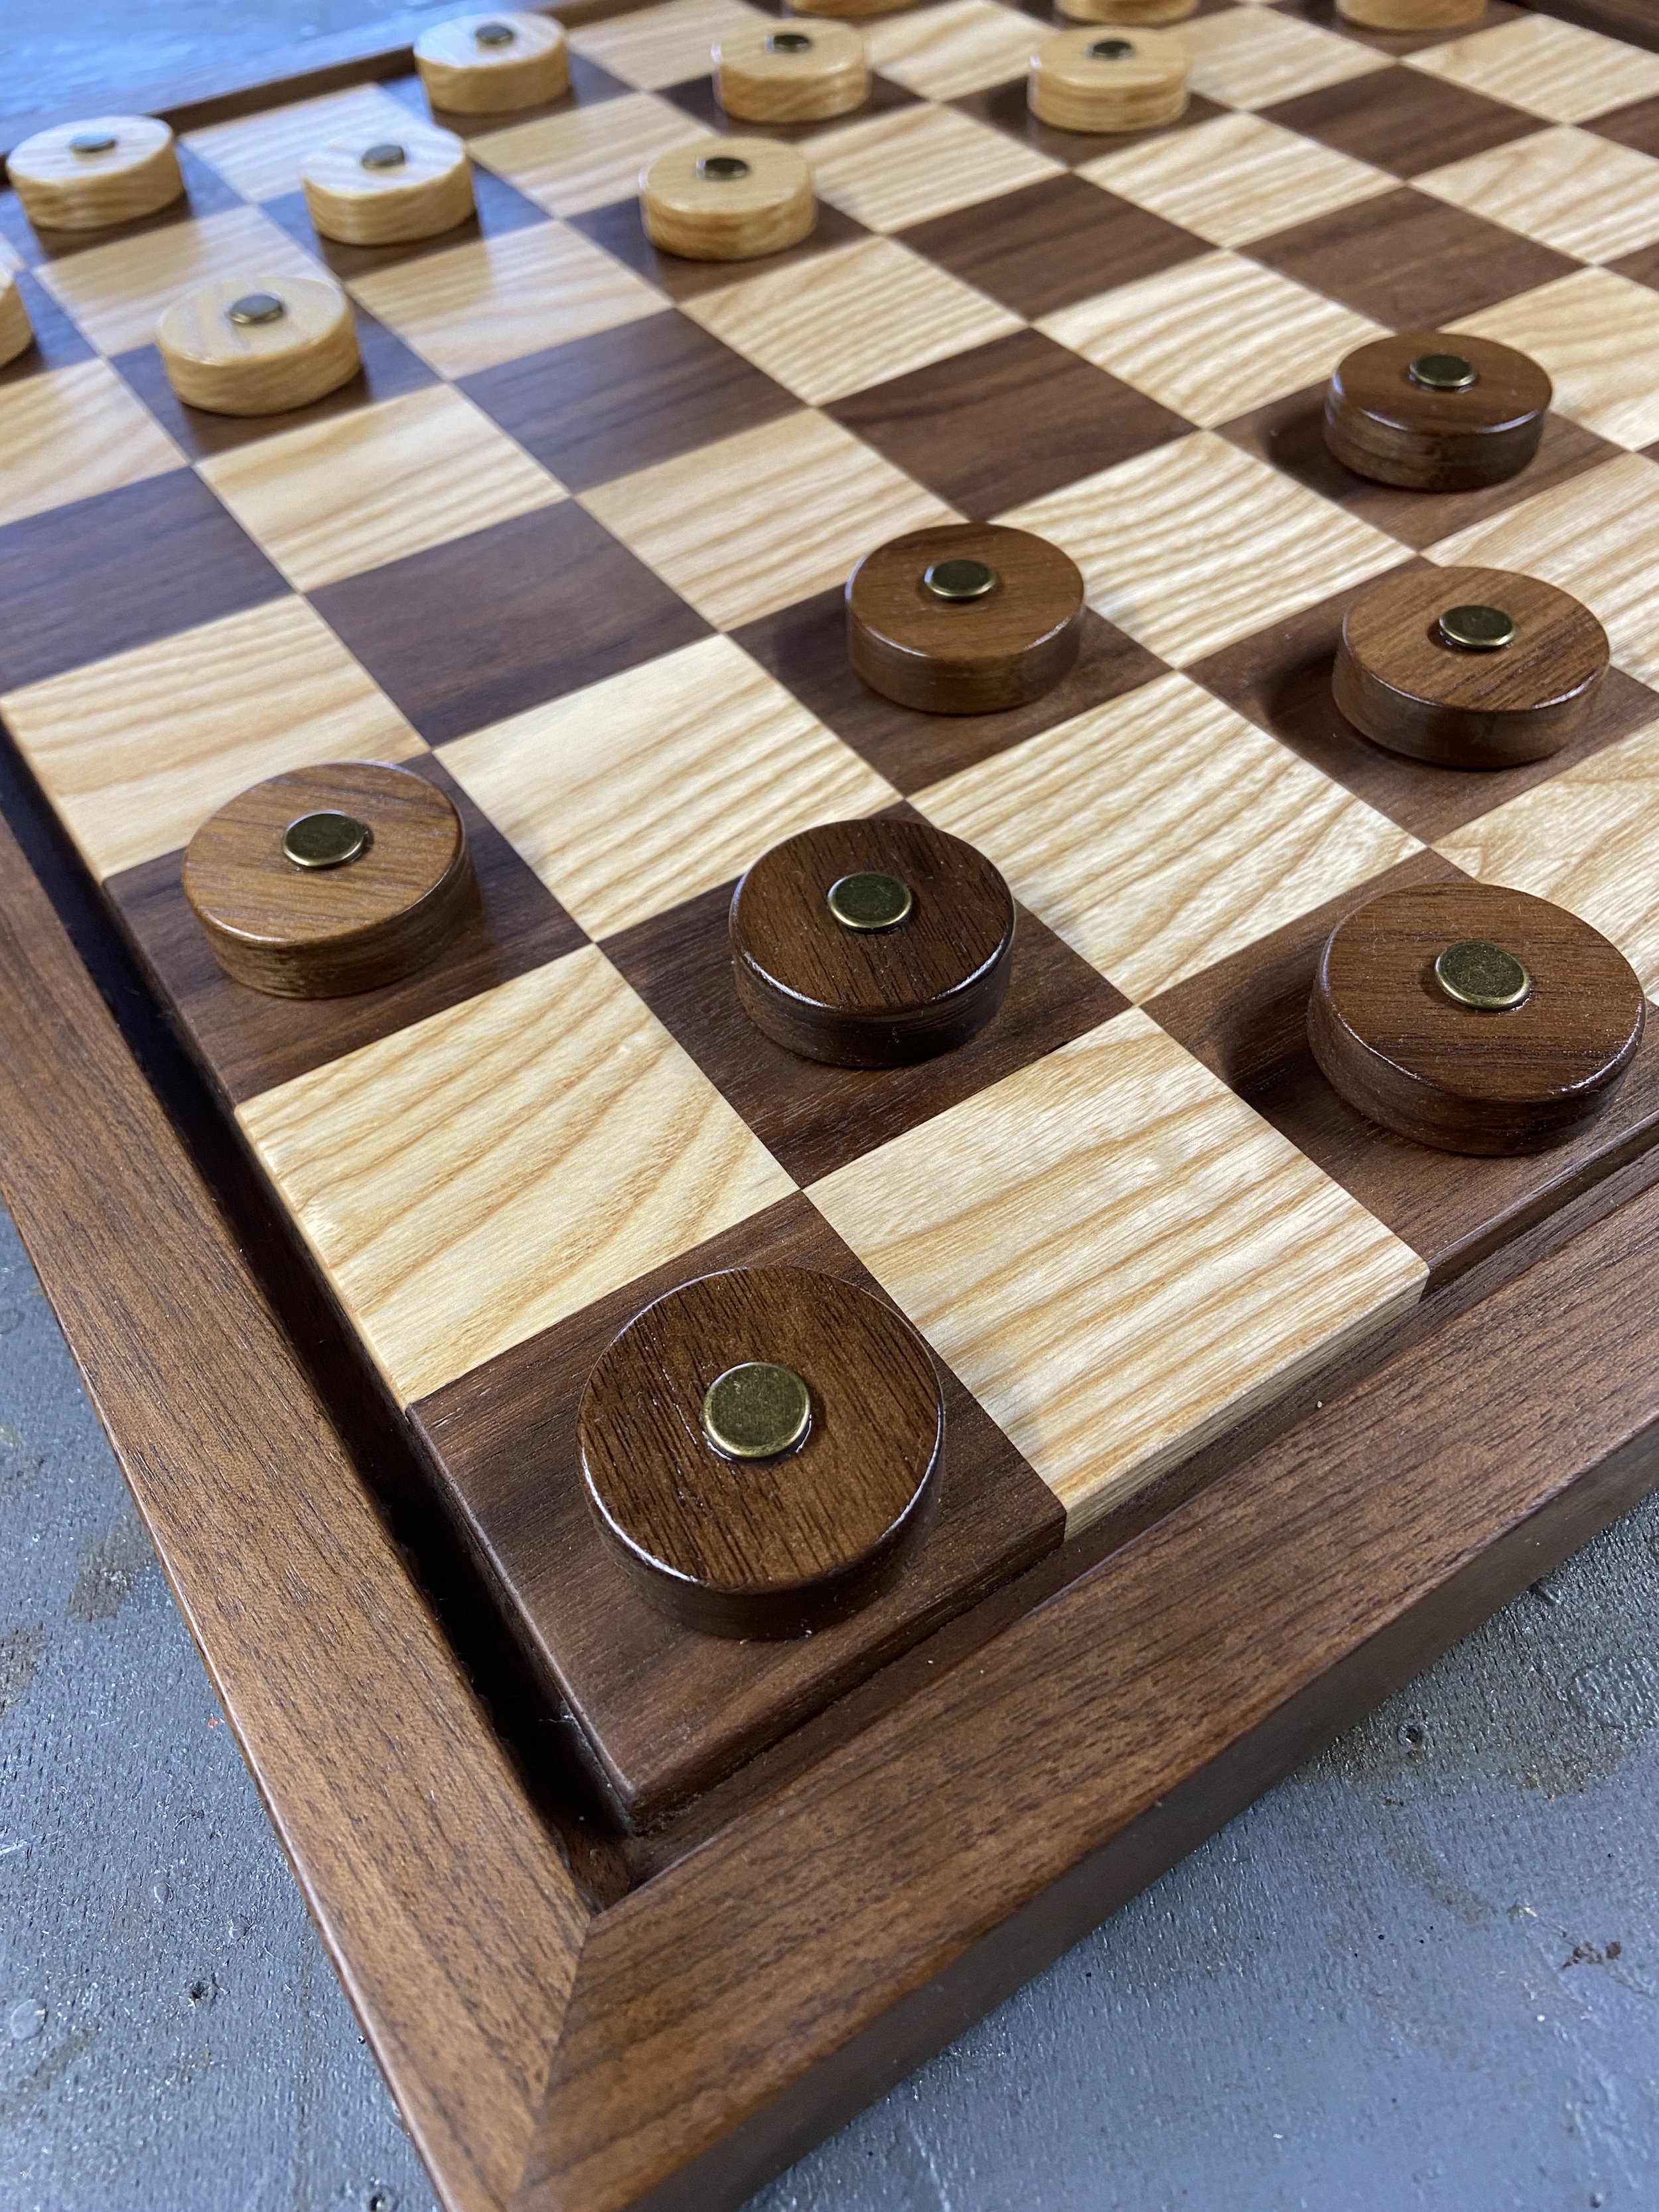 Steampunk Checkers Pieces